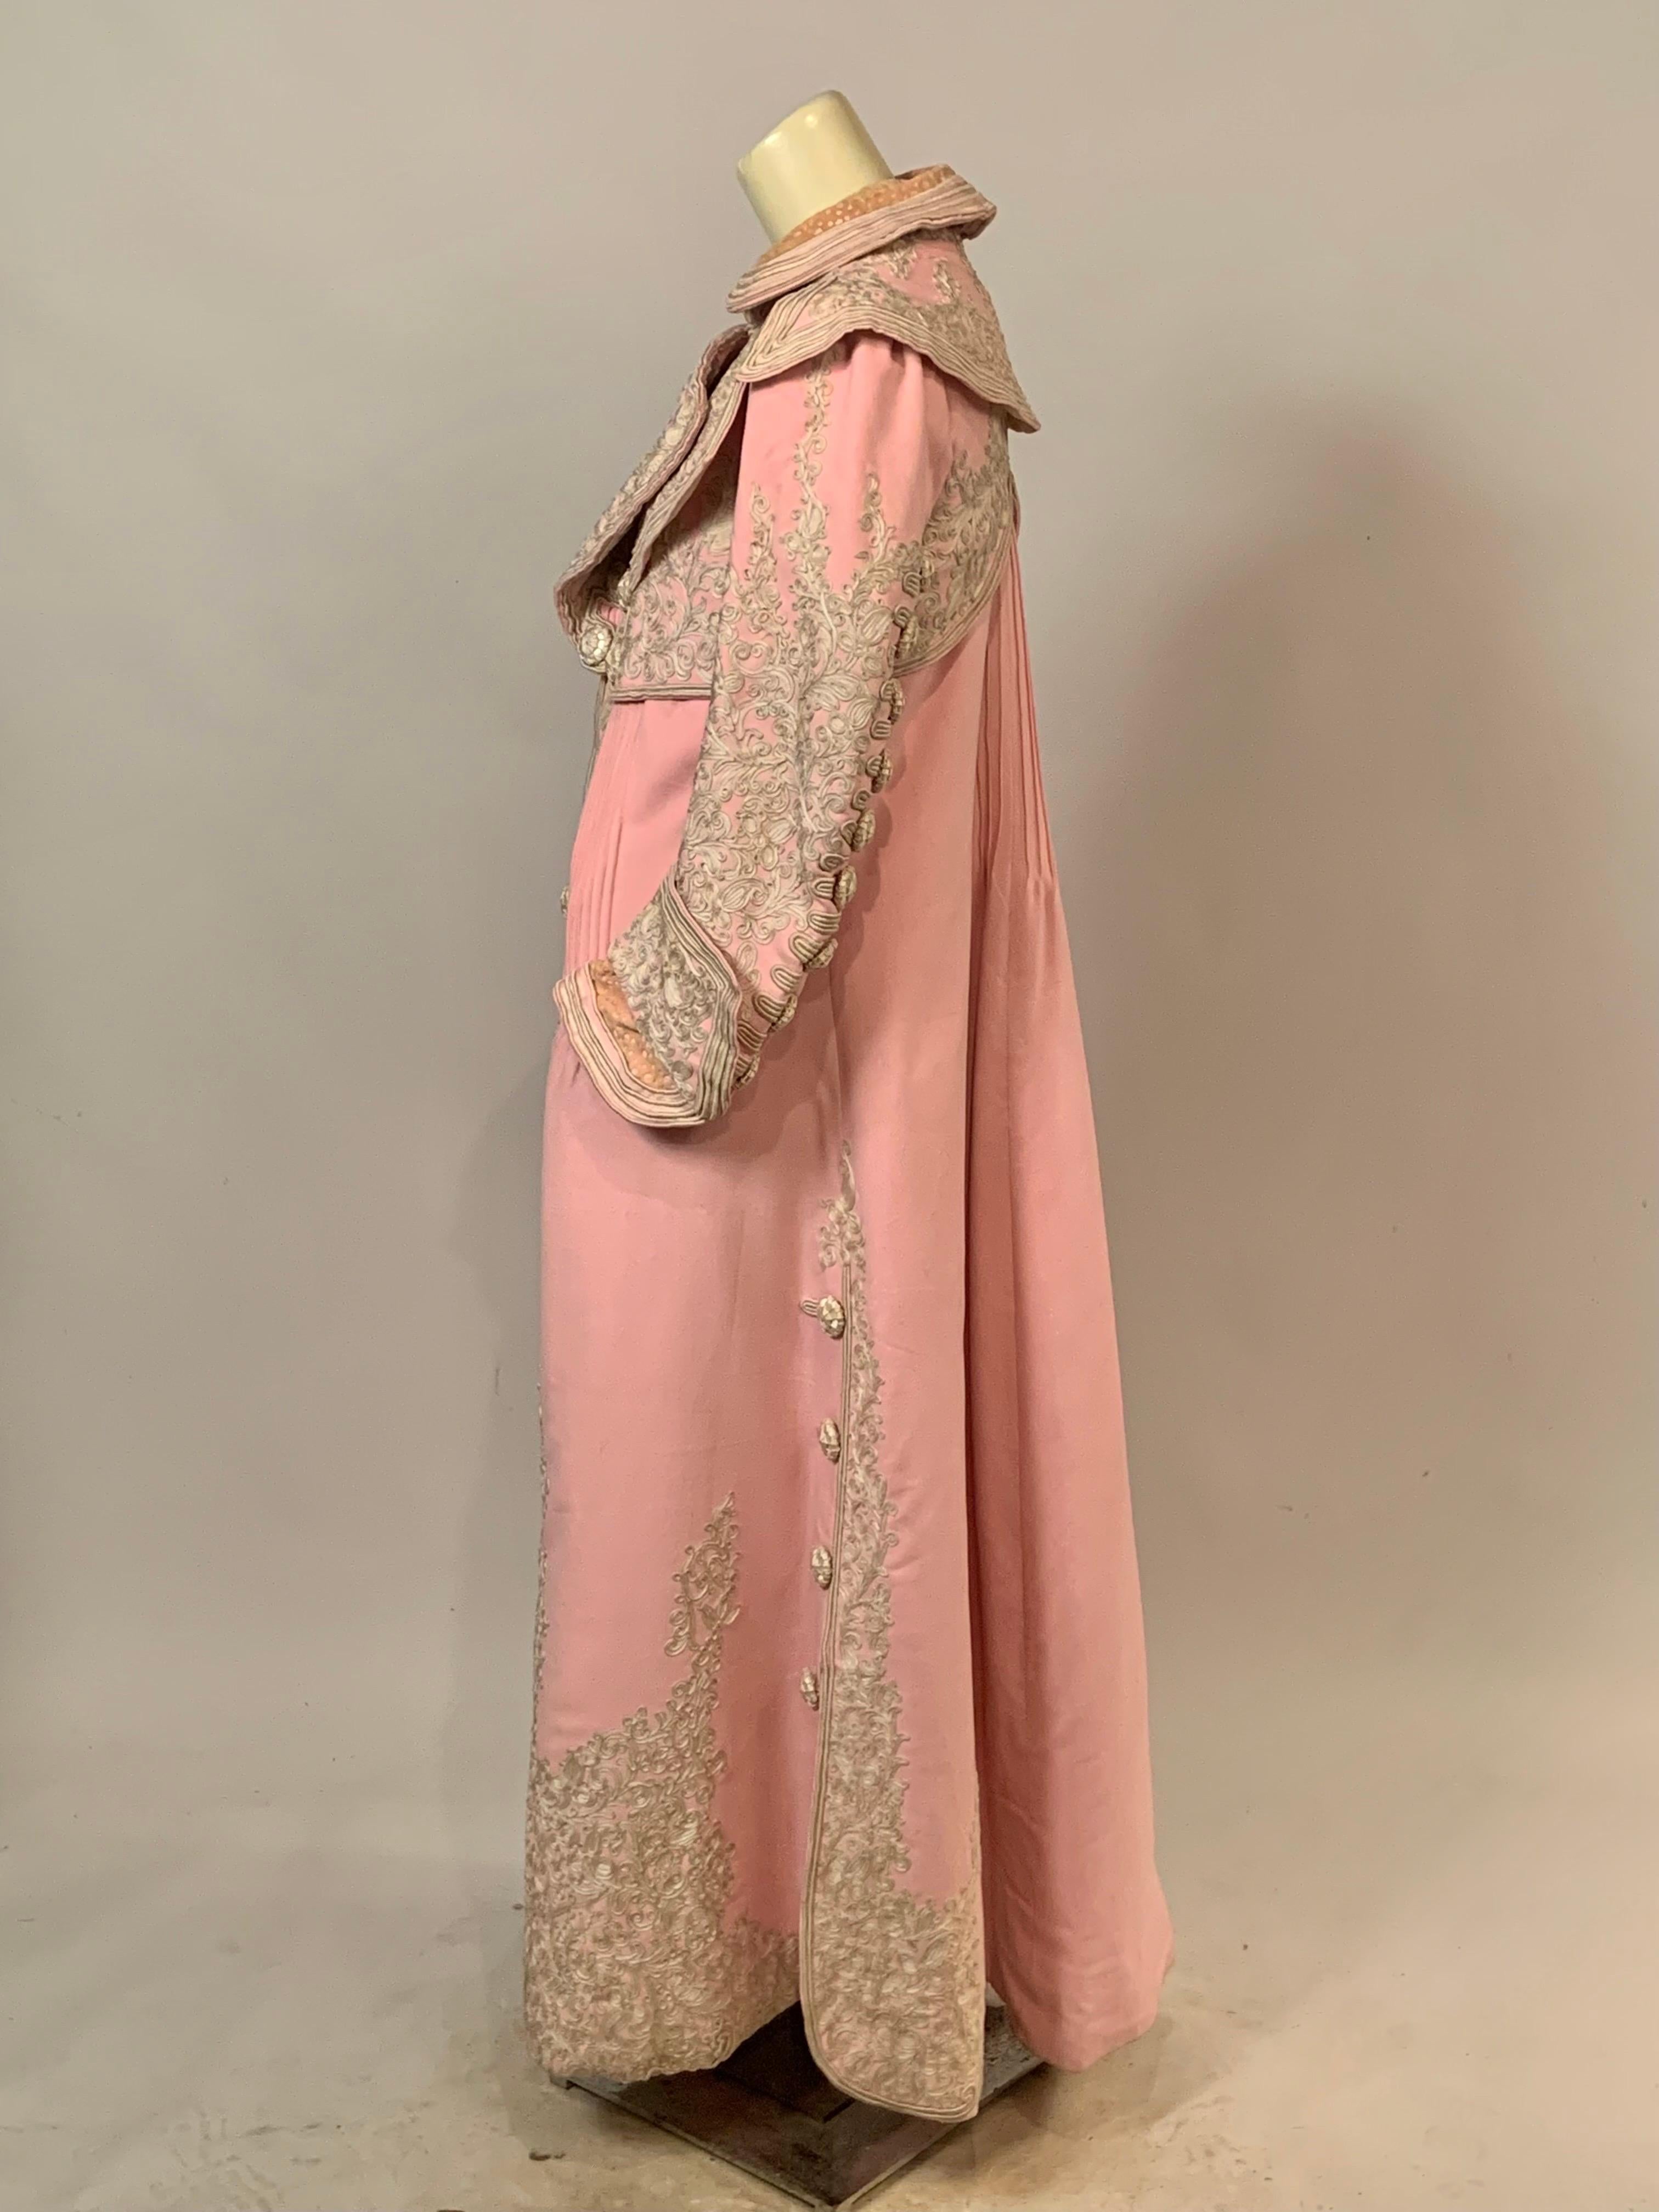 Bright Pink Wool Coat with Elaborate Ribbon Work and Button Trim Circa 1900 2